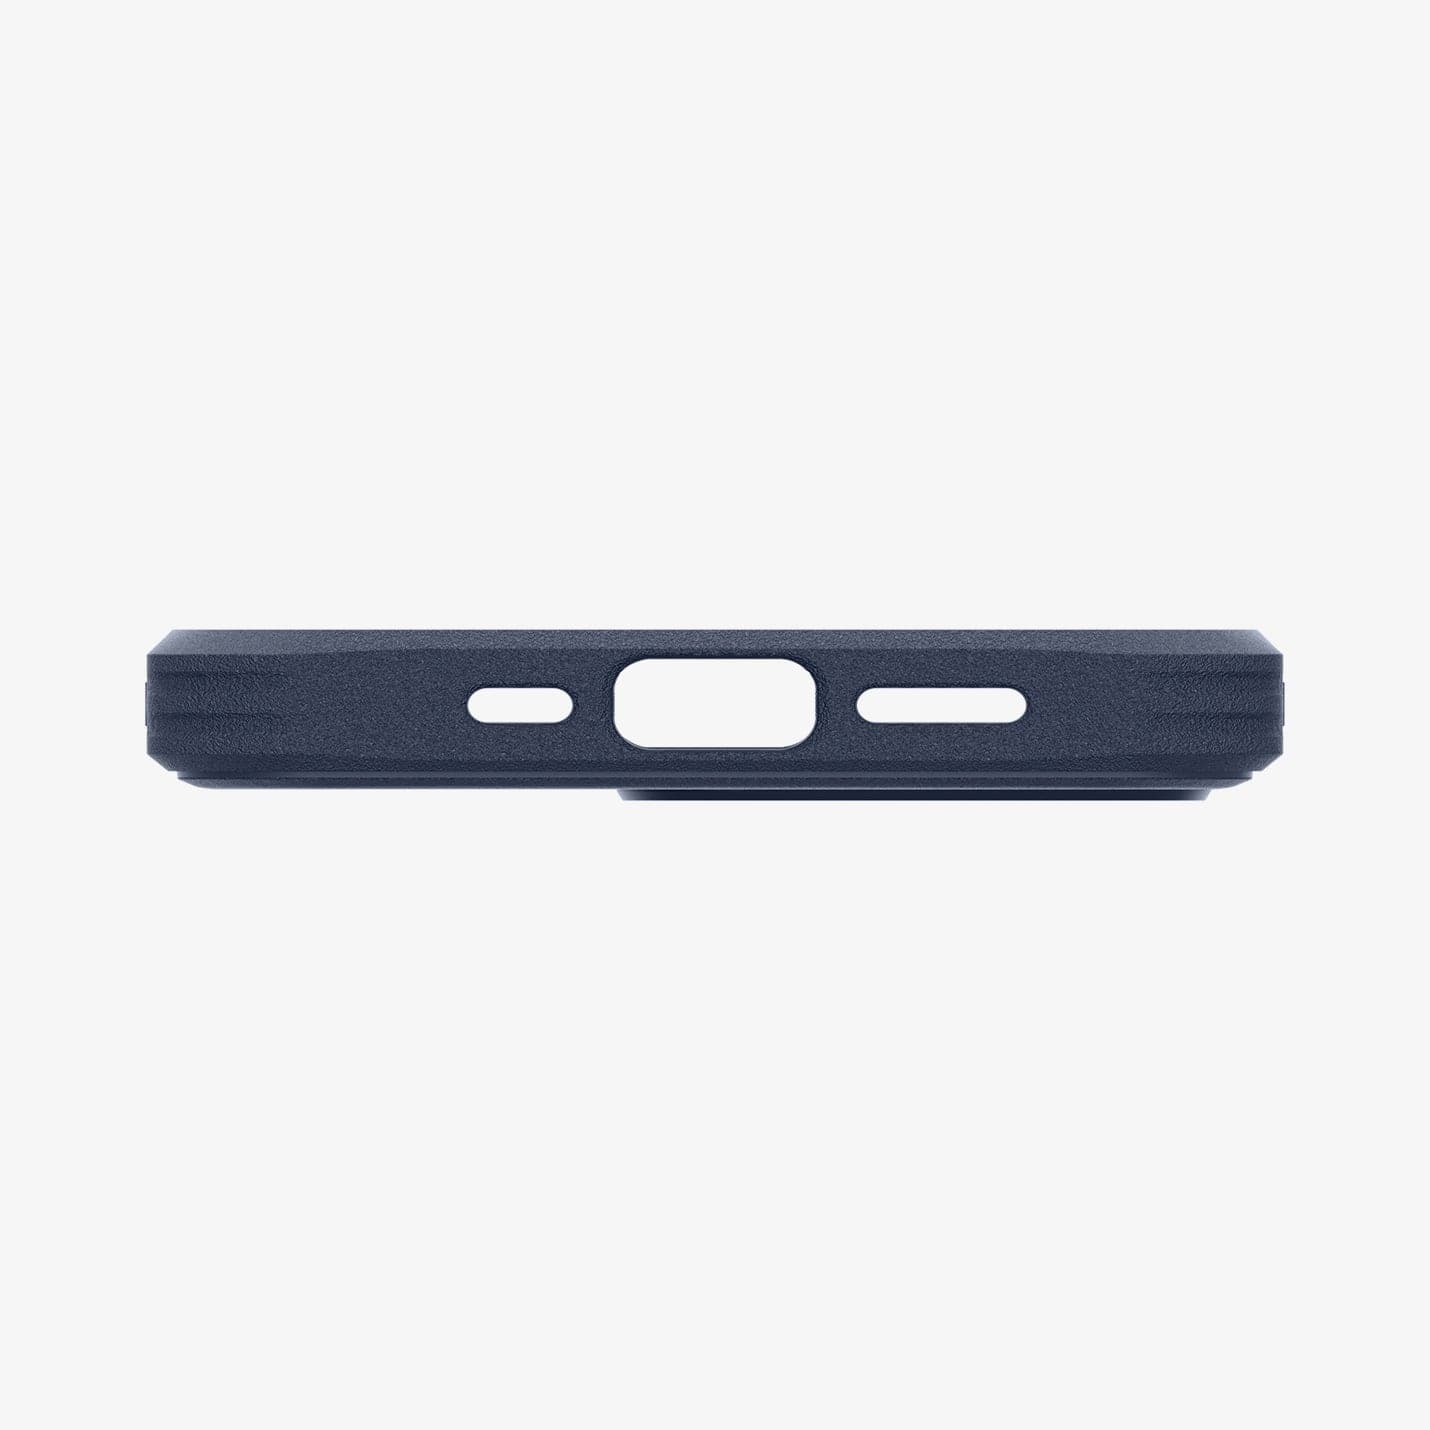 ACS03234 - iPhone 13 Pro Max Case Geo 360 in navy blue showing the bottom with precise cutouts